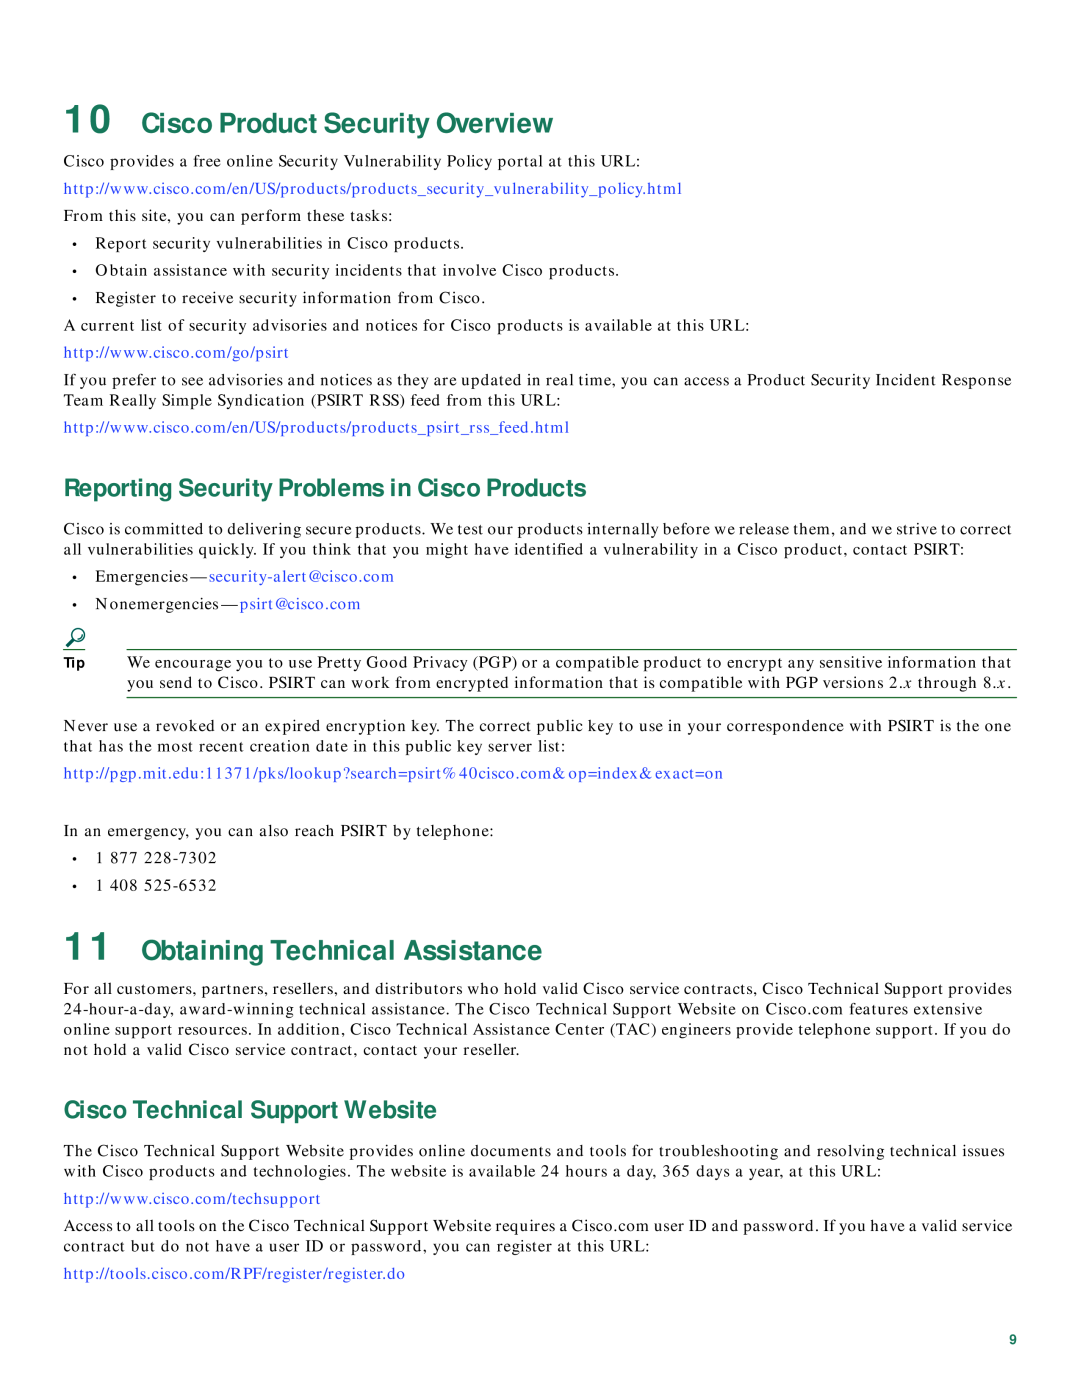 Cisco Systems 1711, 1712 Cisco Product Security Overview, Obtaining Technical Assistance, Cisco Technical Support Website 